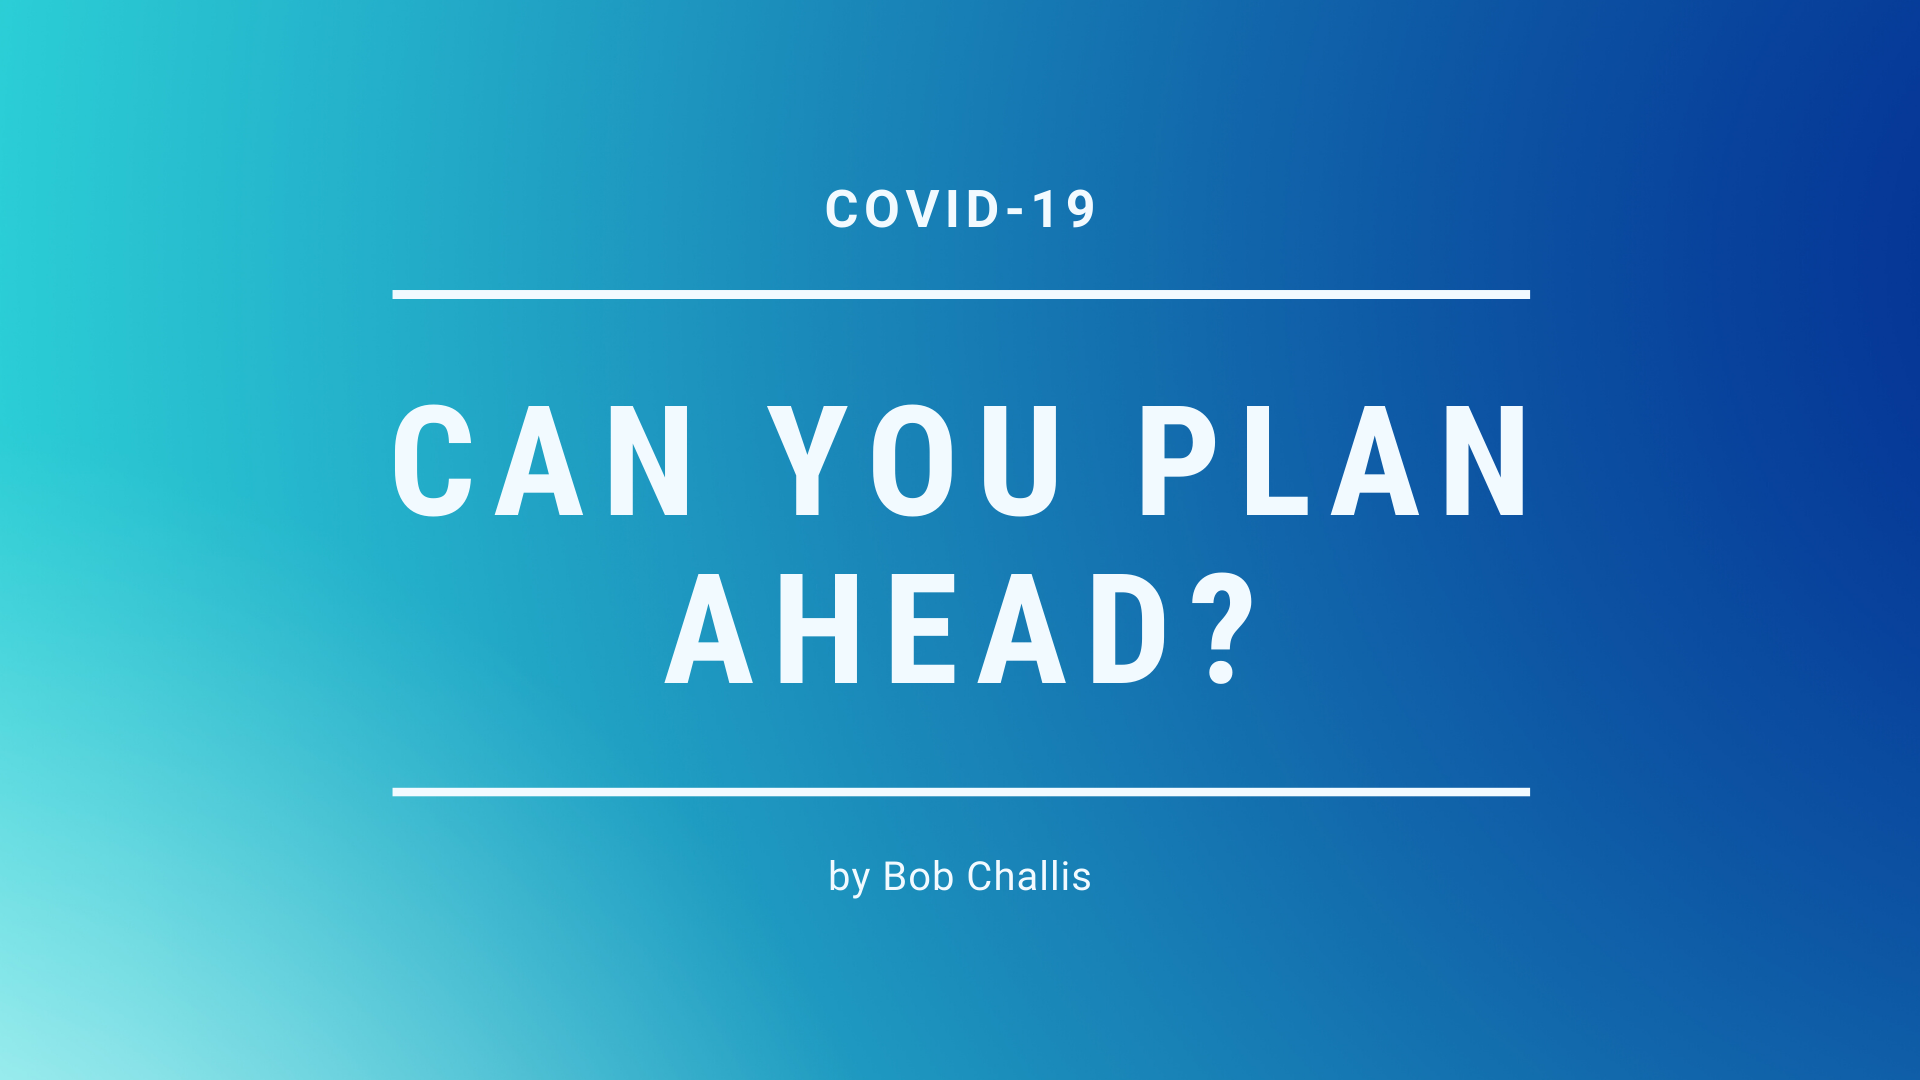 Can you plan ahead?